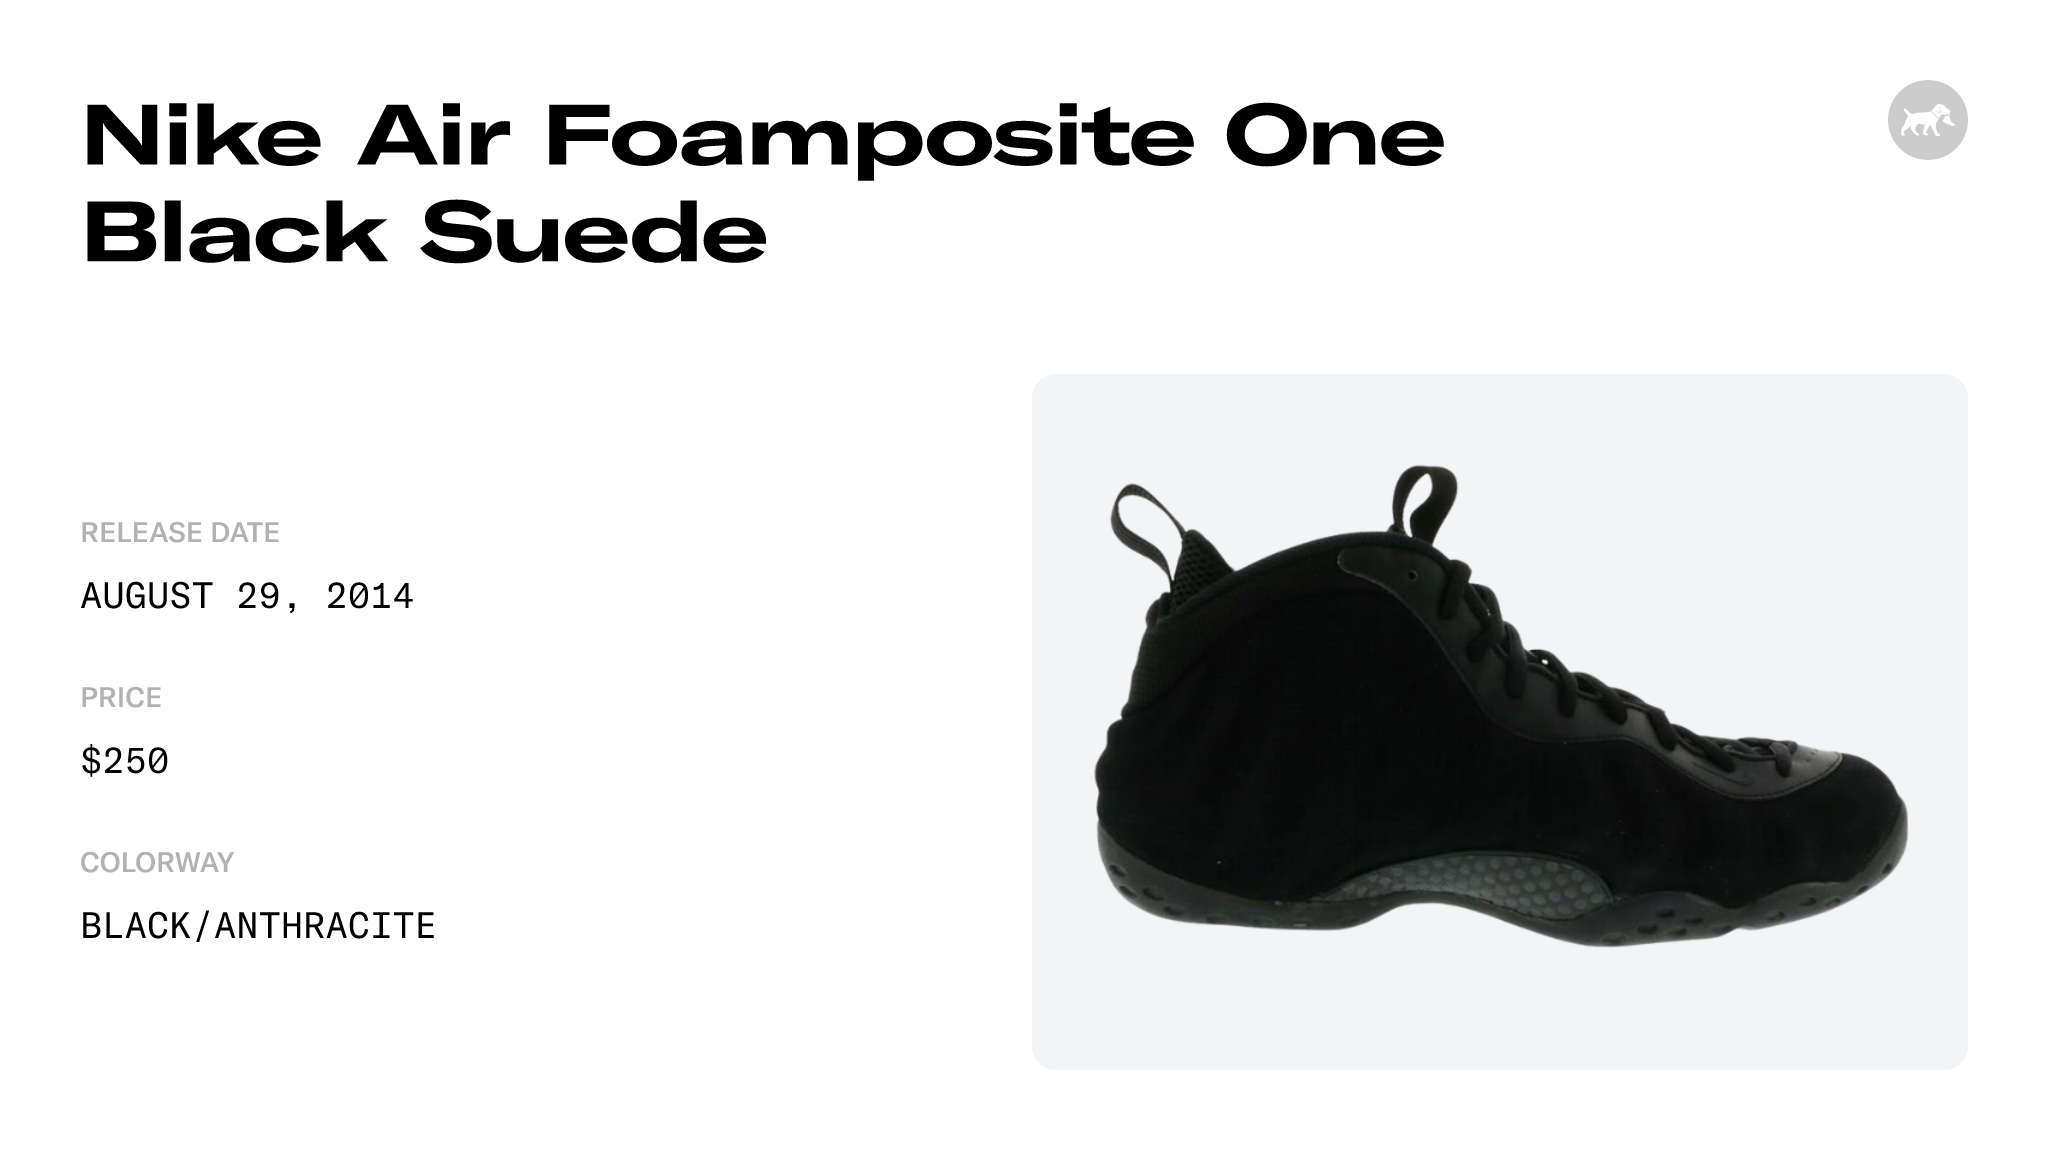 Nike Air Foamposite One Black Suede - 575420-006 Raffles and Release Date